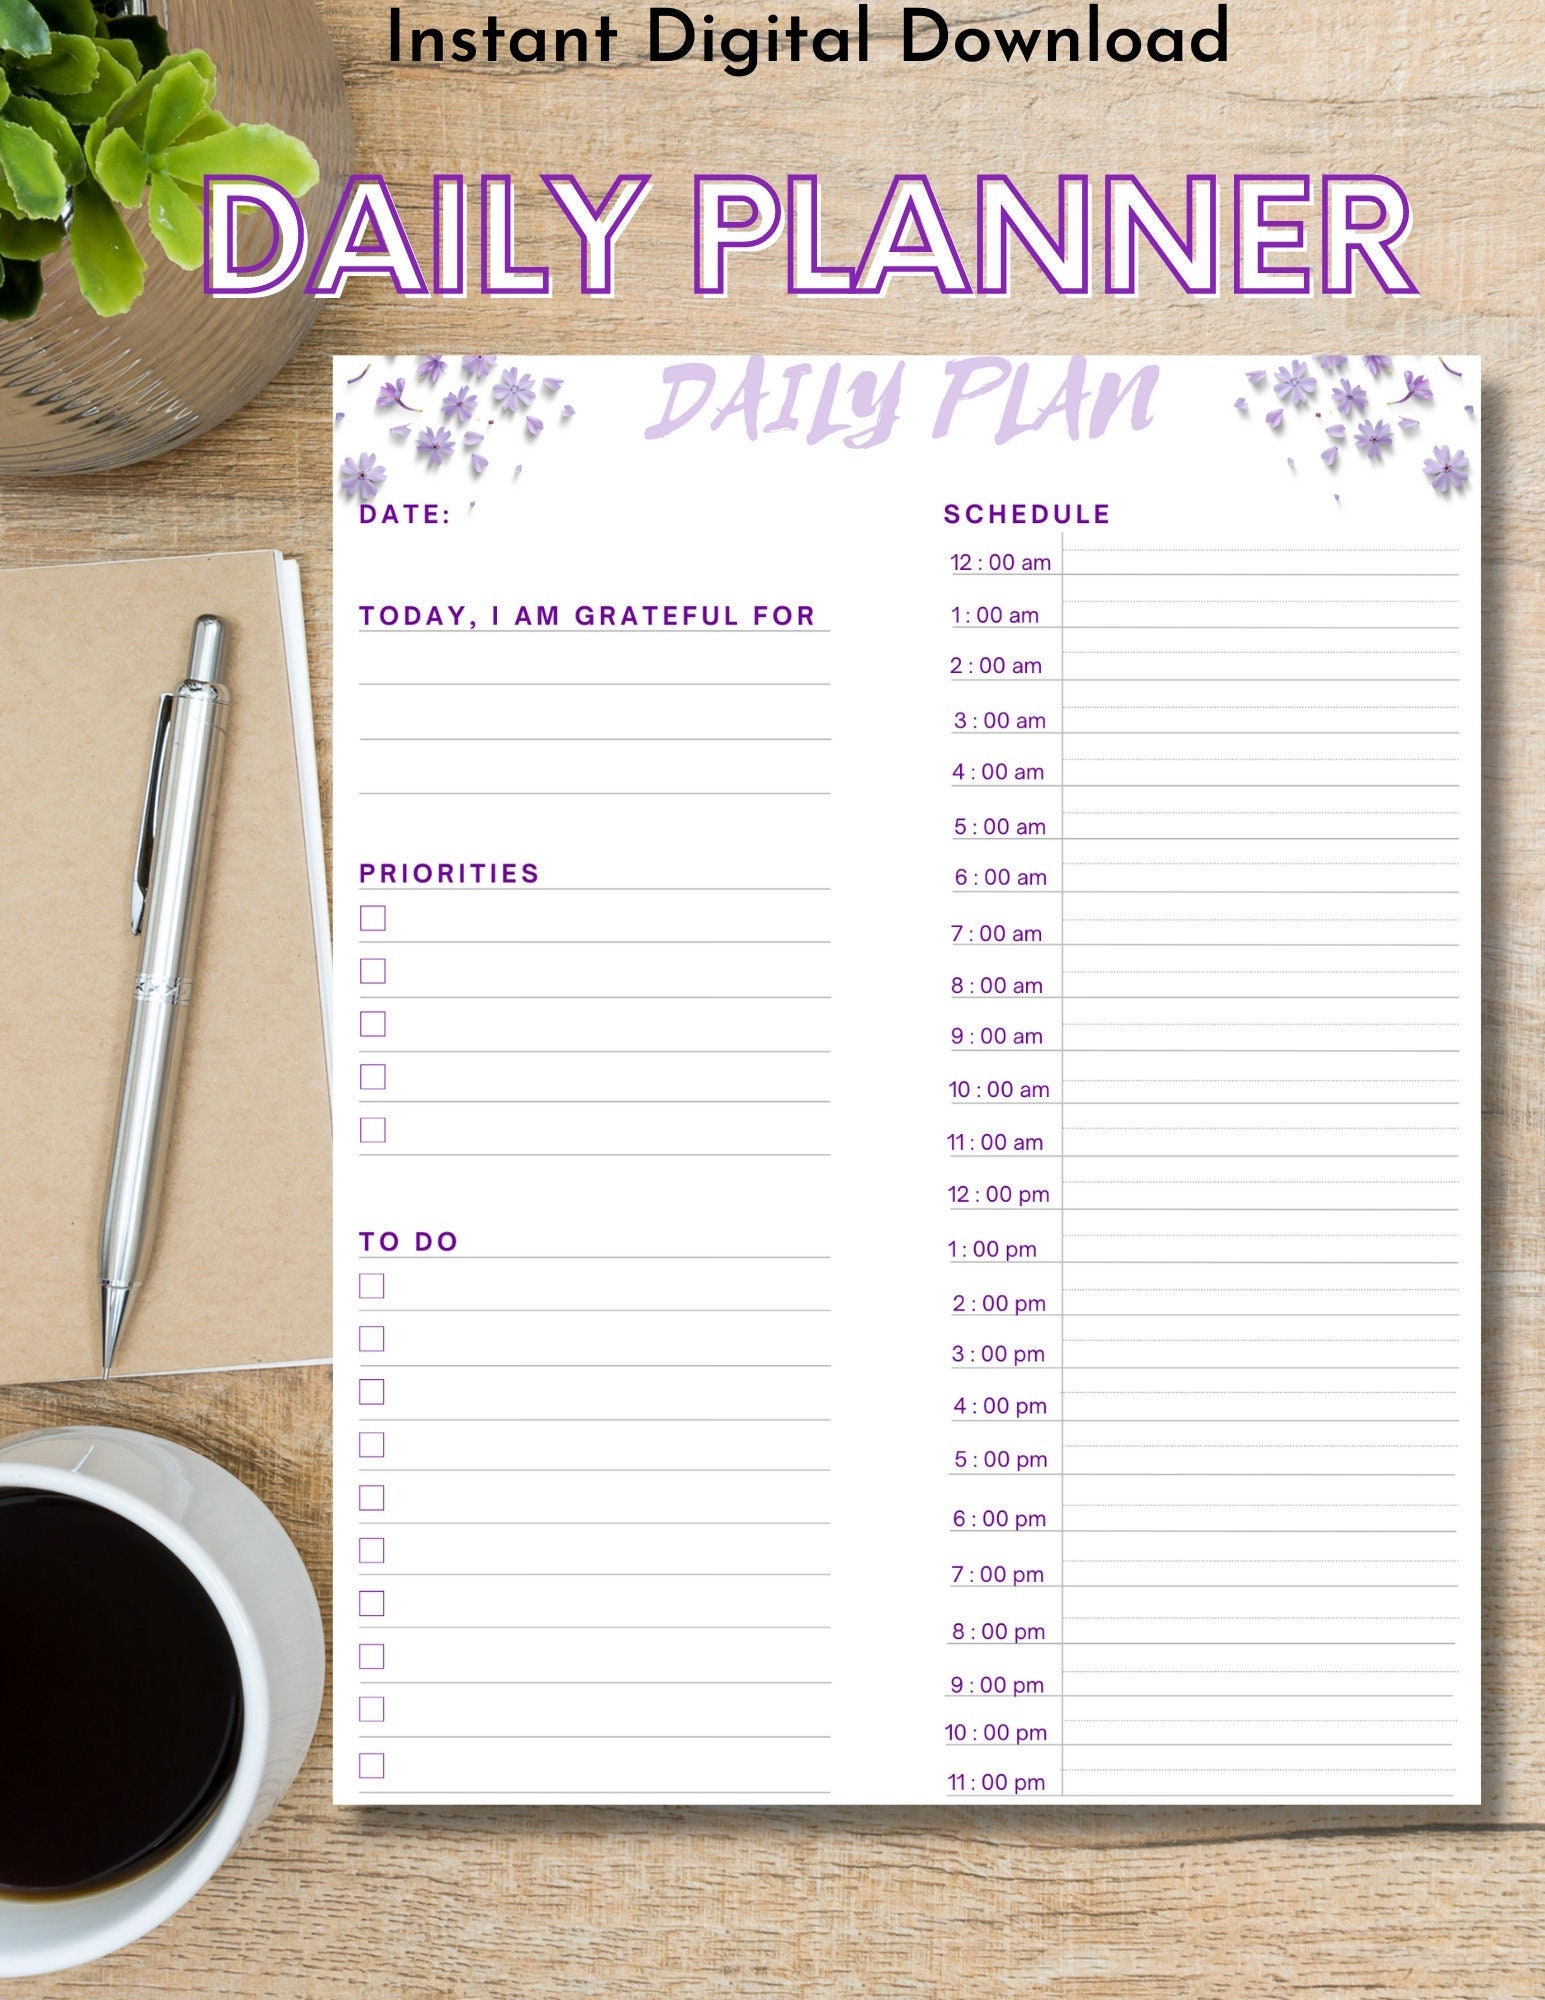 24 Hour Daily Planner - Daily To Do List for Work & Personal Life,  Productivity Planner, Everyday Planner, Daily Schedule, 6.5 x 9.8